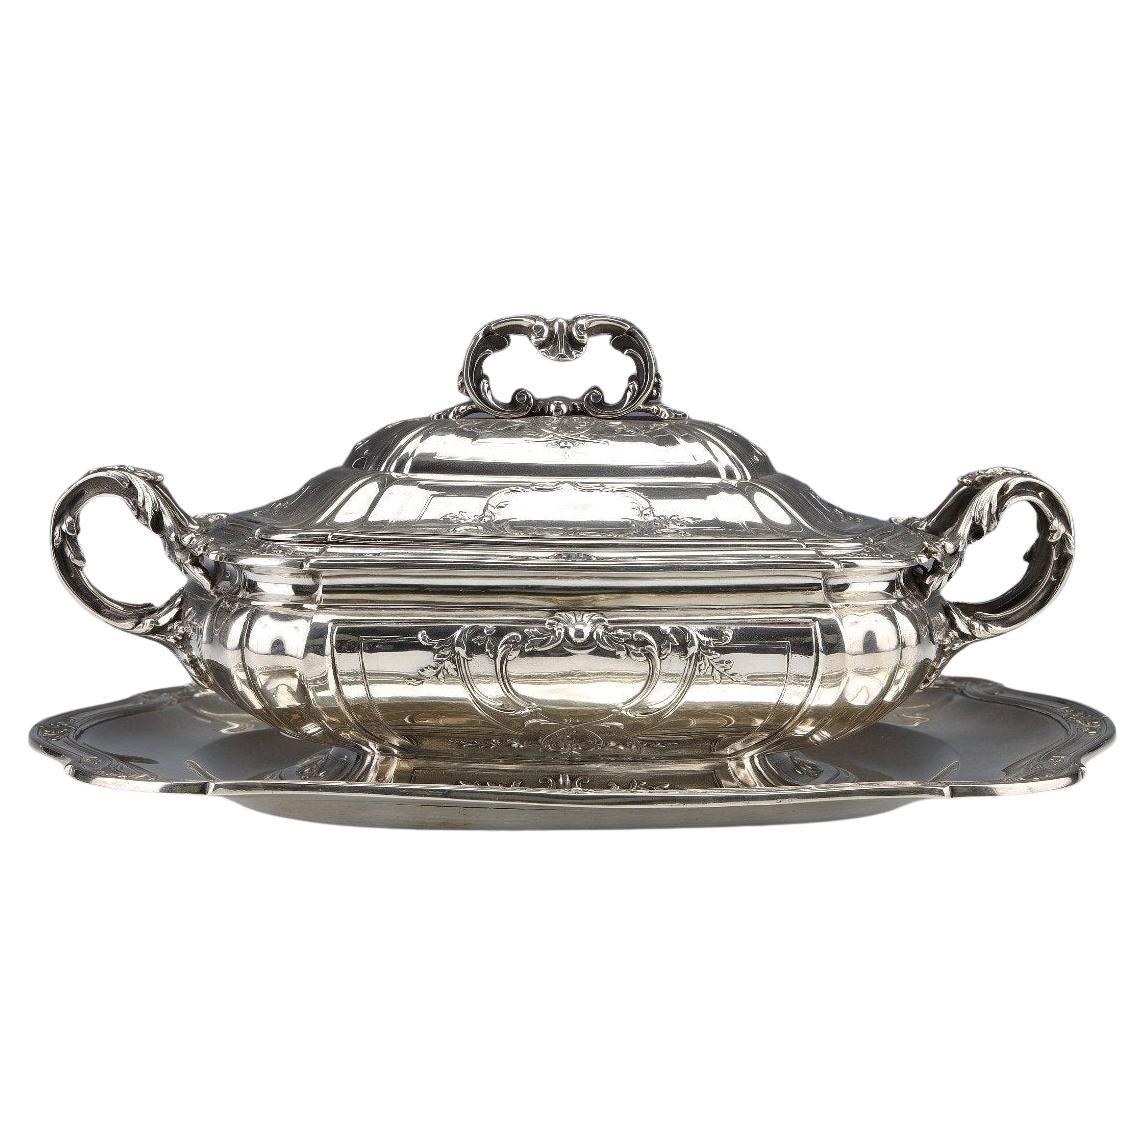 Puiforcat - Vegetable Dish And Its Display Stand In Solid Silver, Late 19th For Sale